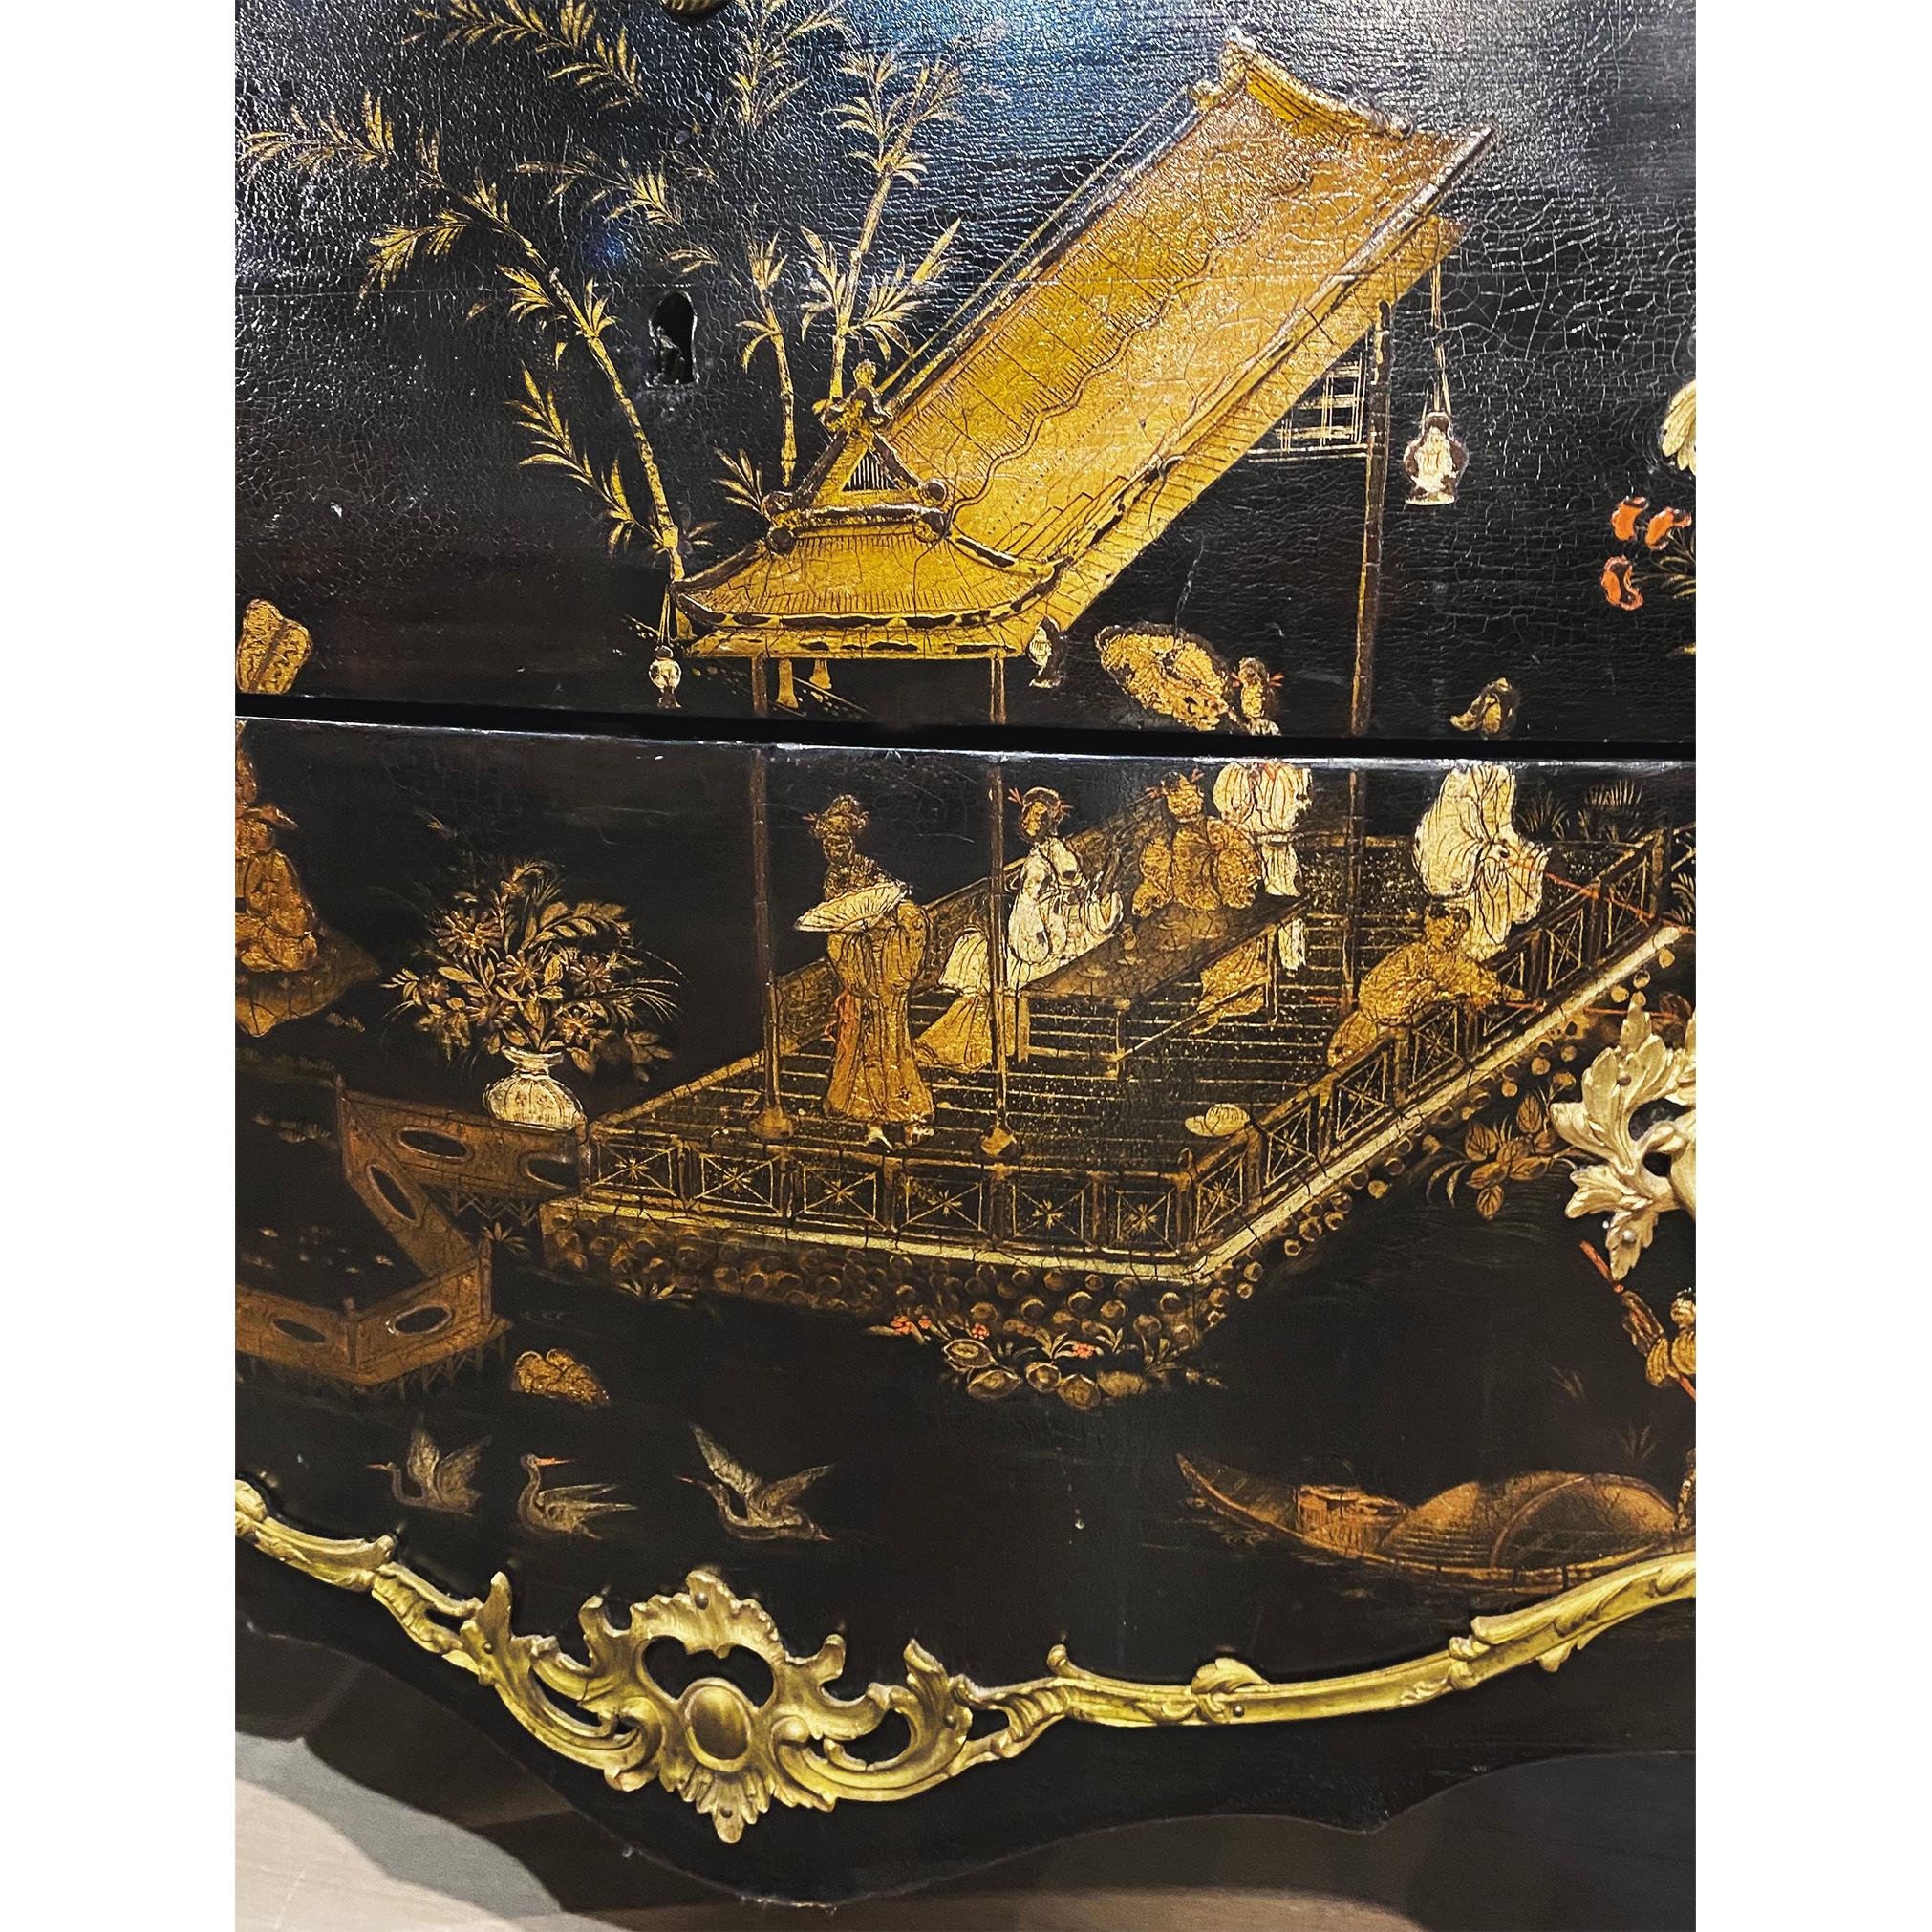 This Louis XV style gilt-bronze mounted lacquer commode contains a beautiful lake scene painted in chinoiserie style depicting people in a Chinese garden surrounded by a lake, small islands, a trio of cranes and lush nature. The scene is dotted with